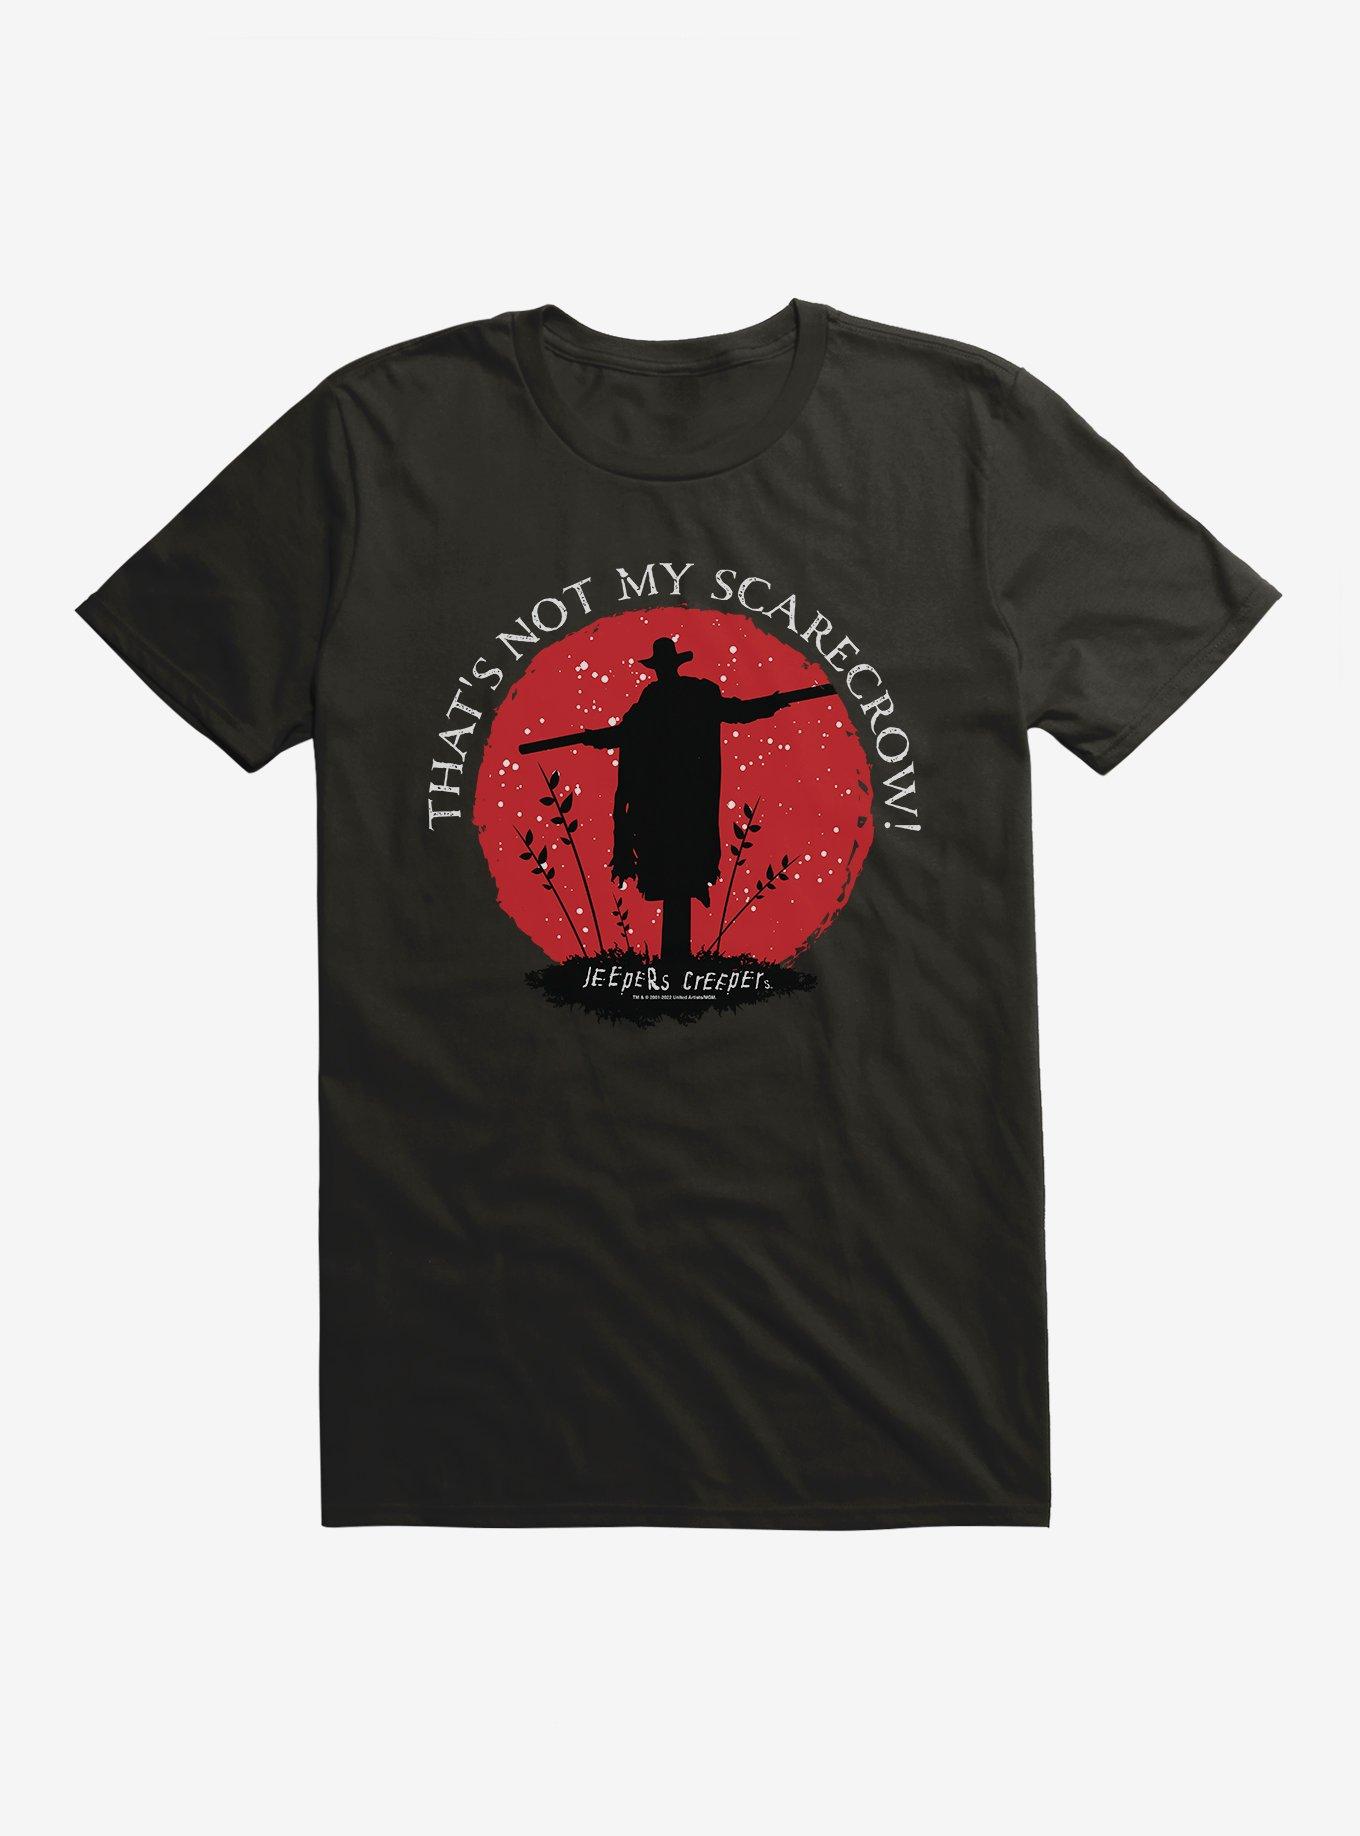 Jeepers Creepers Scarecrow T-Shirt, BLACK, hi-res